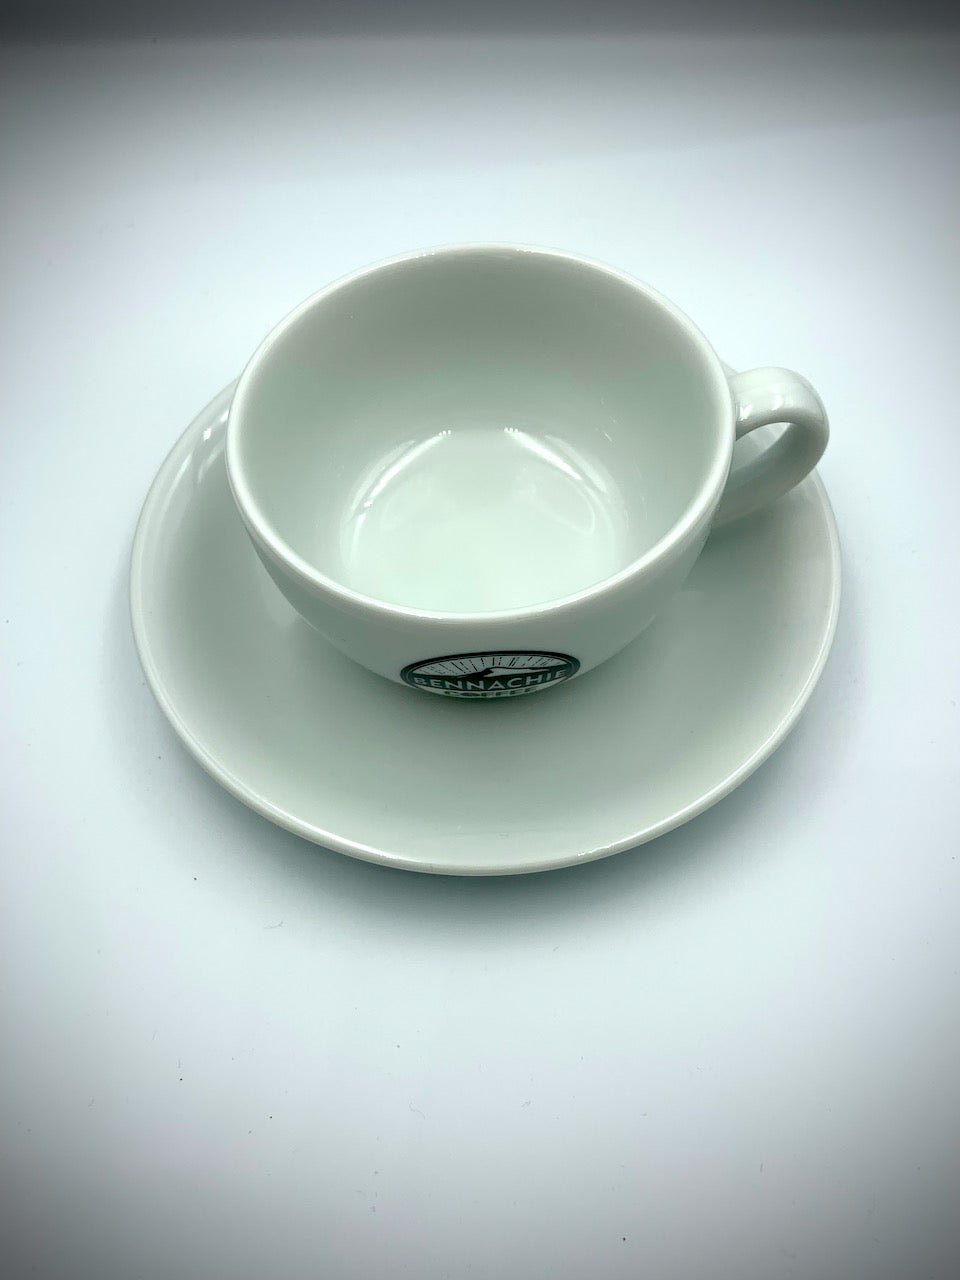 Cappuccino cup & saucer - with Bennachie Coffee logo